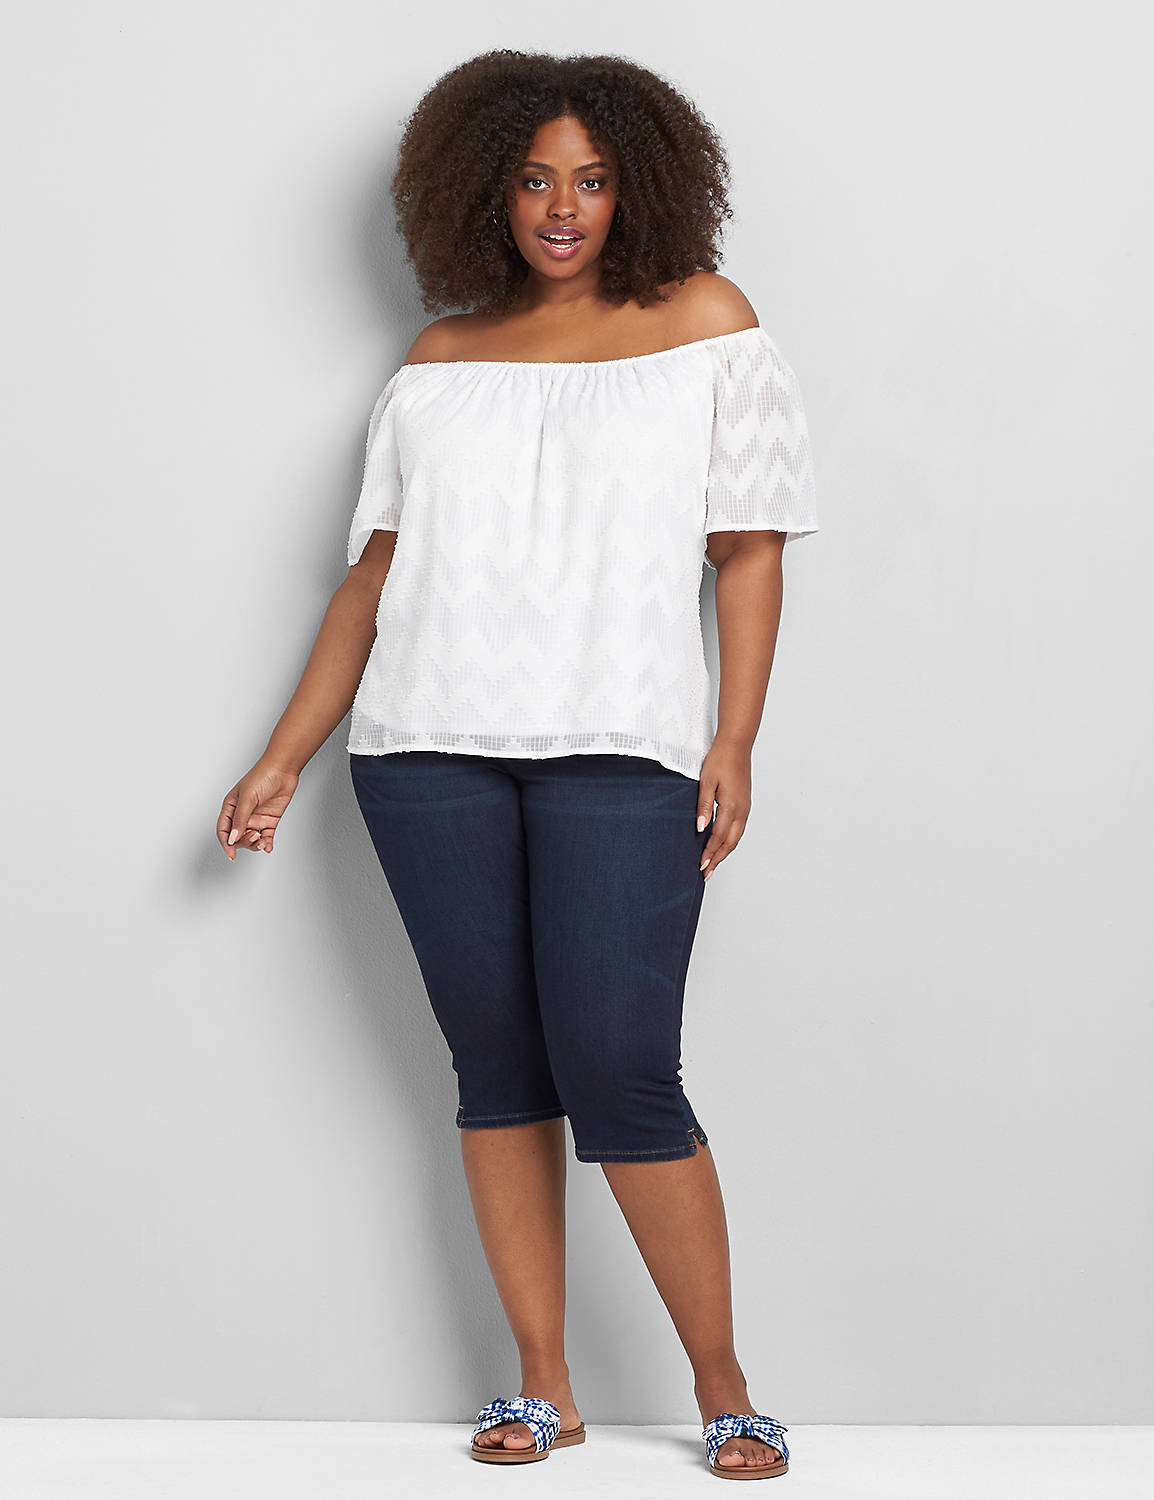 Textured  Off-The-Shoulder Top Product Image 3